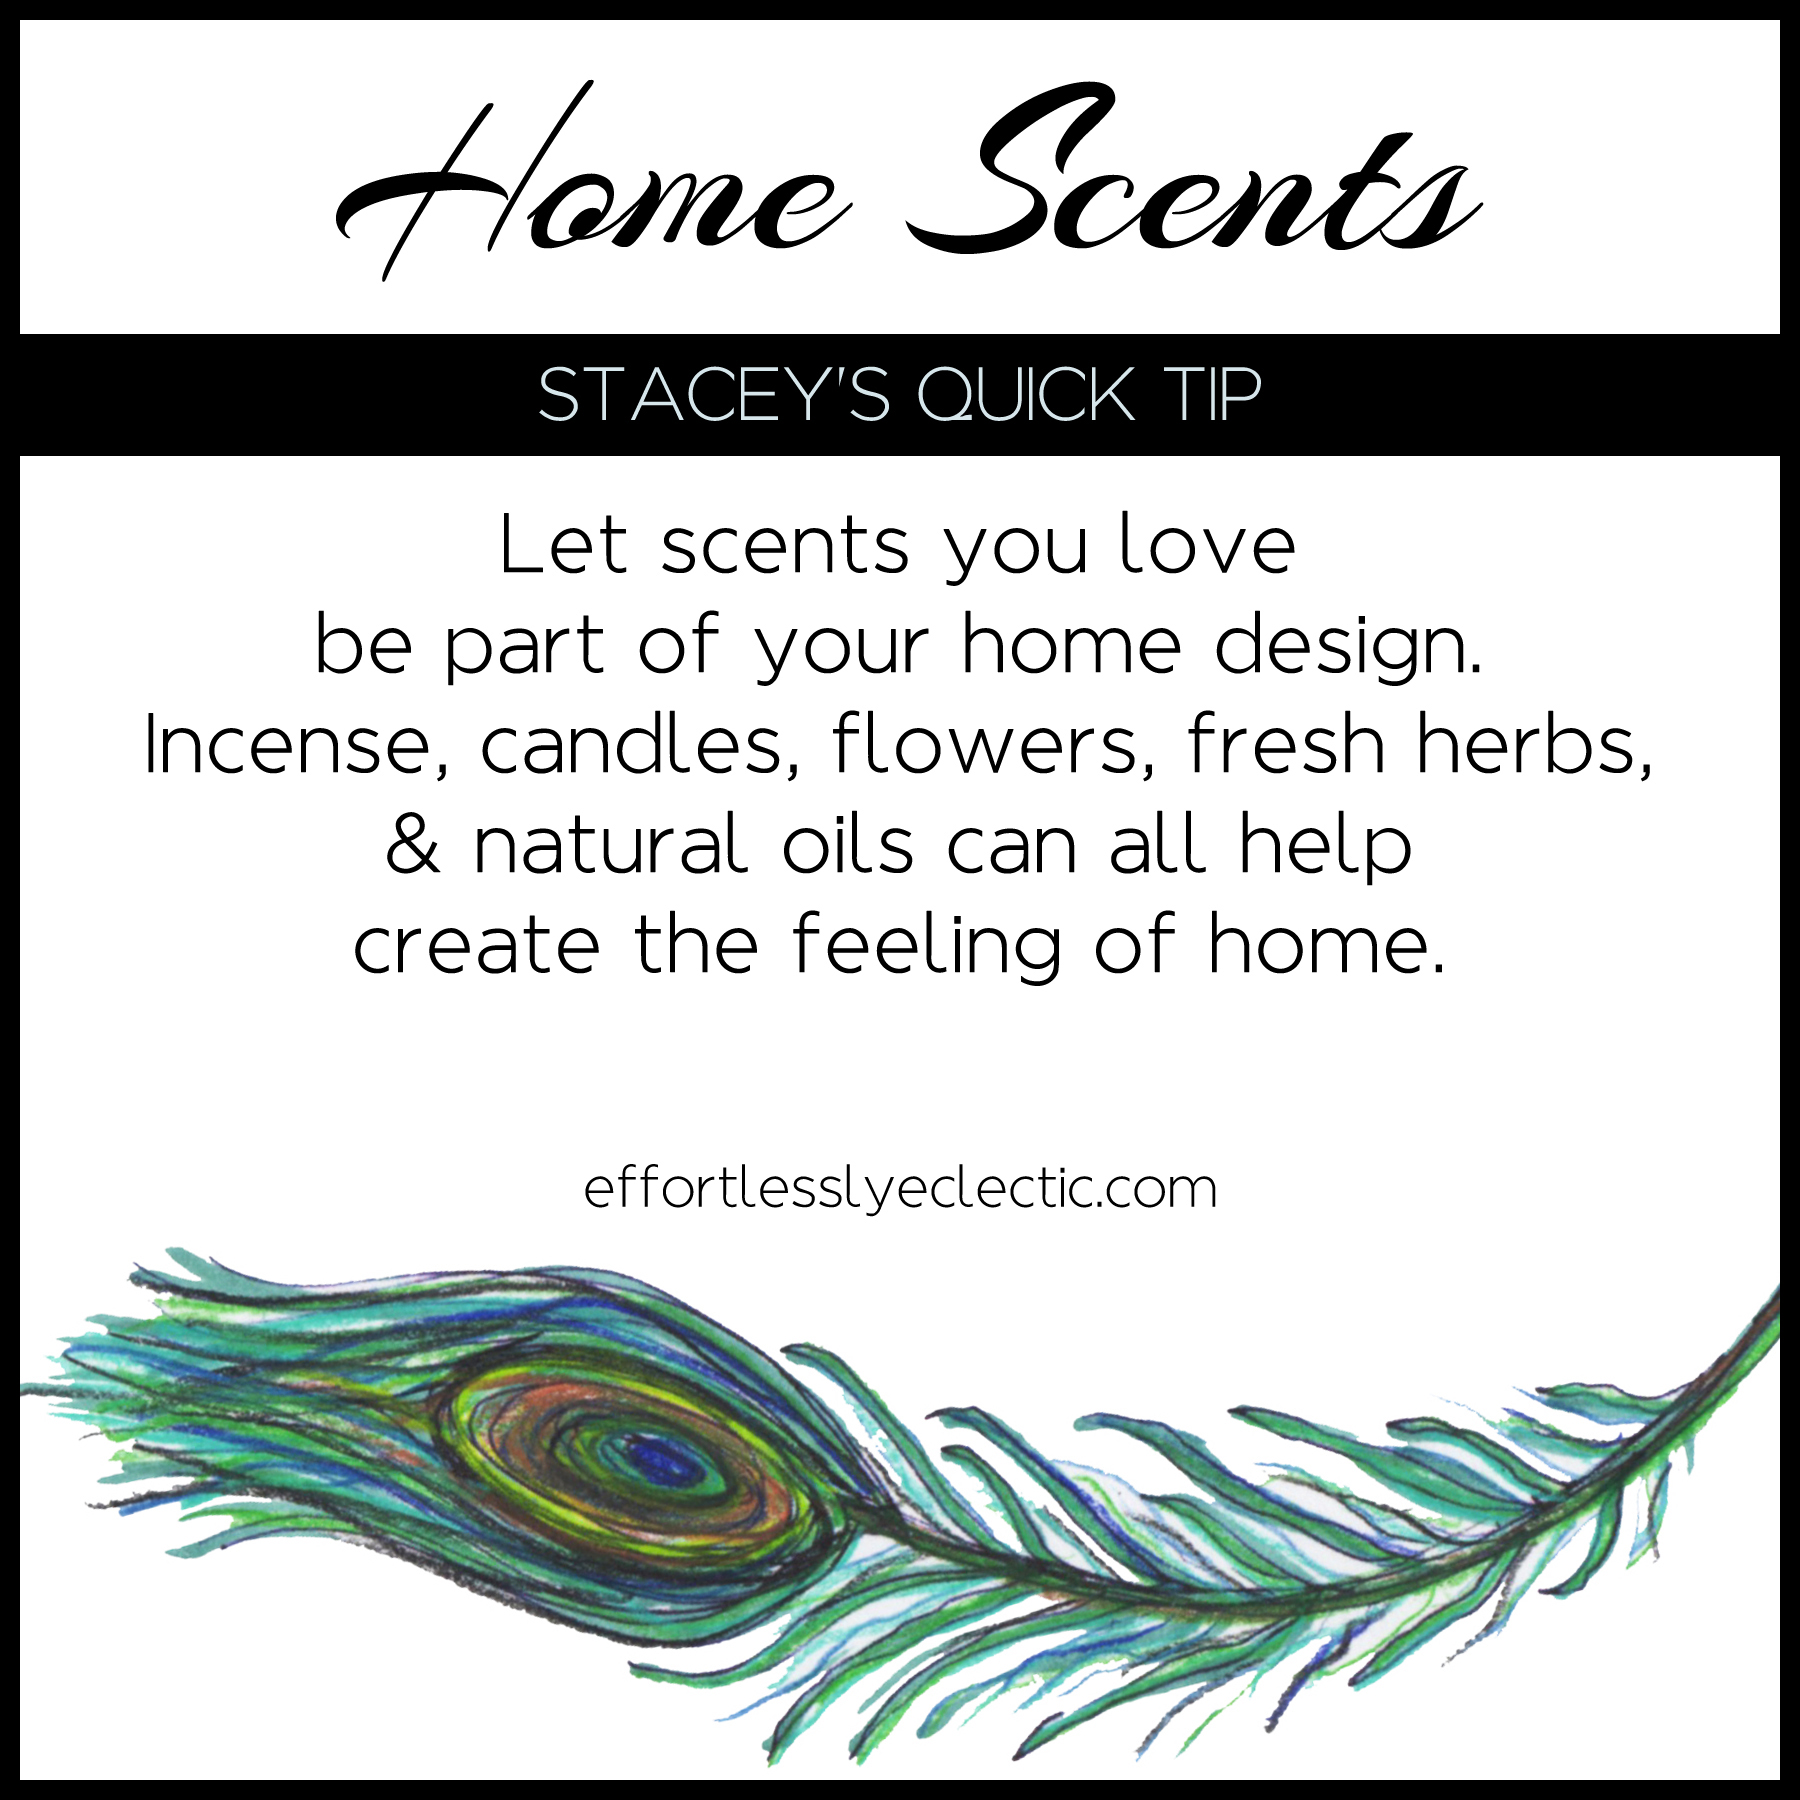 Home Scents - A home decorating tip about how to use scents in your home